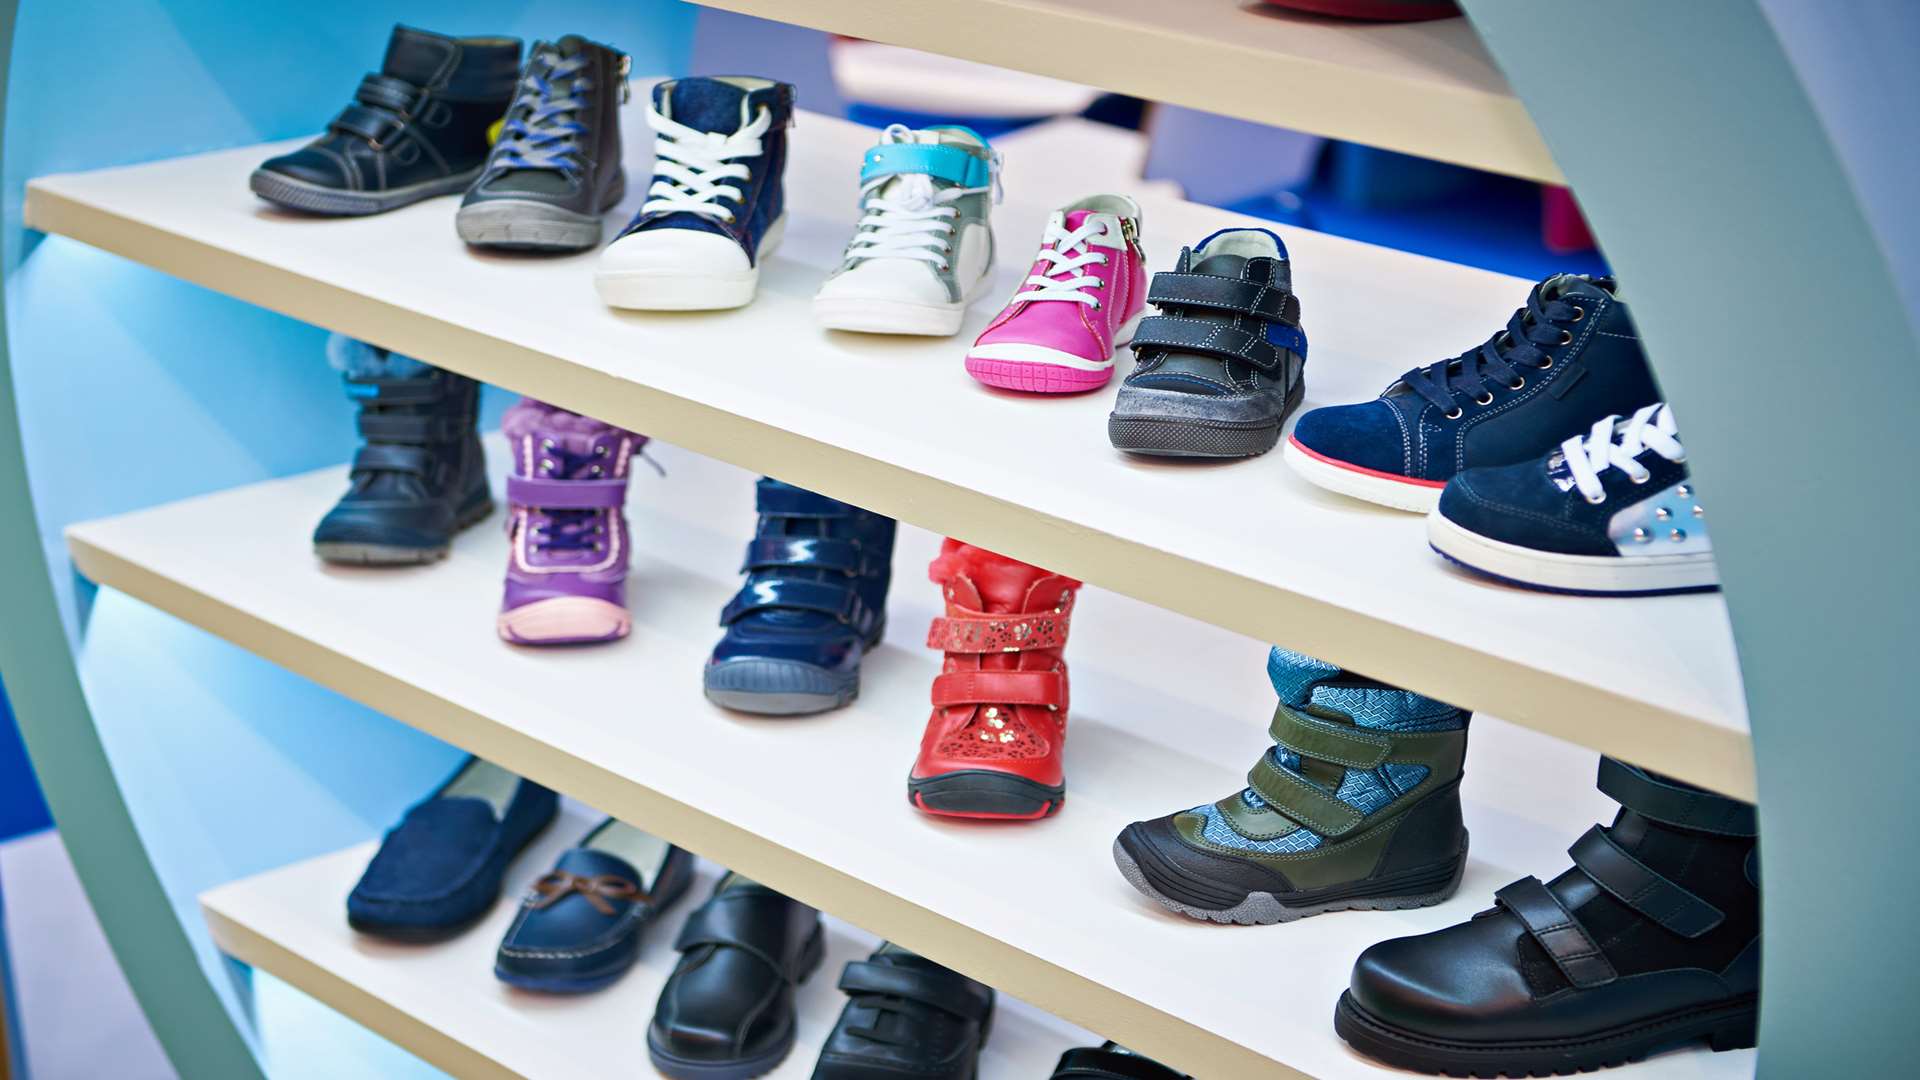 Parents are advised to check their child's shoe size around every two months